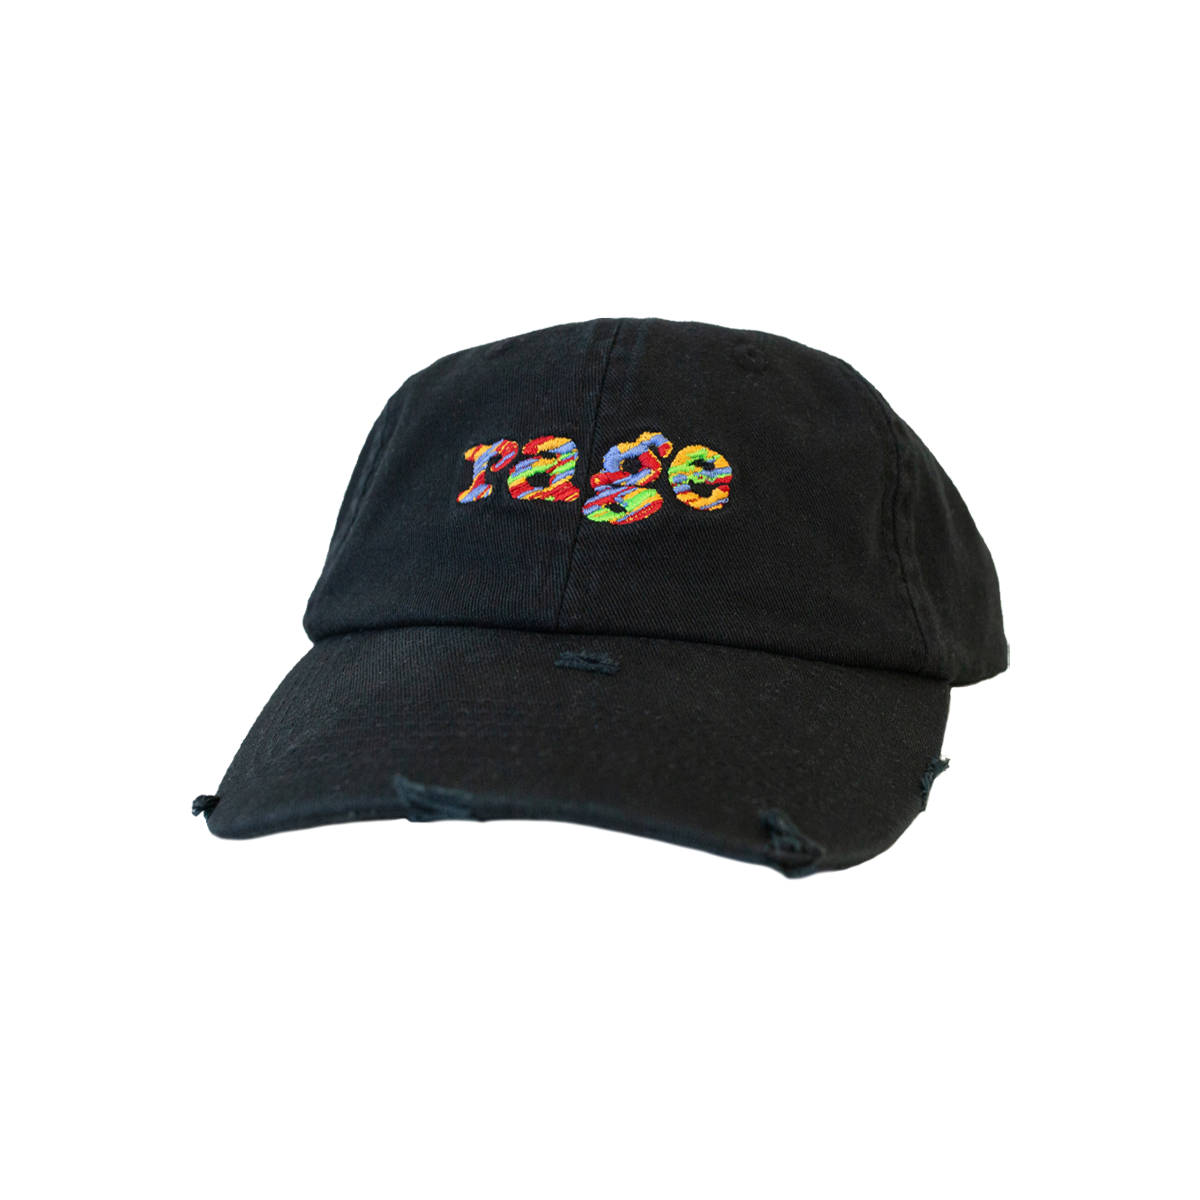 Black Vintage Distrssed Cap with Embroidered Rage Logo